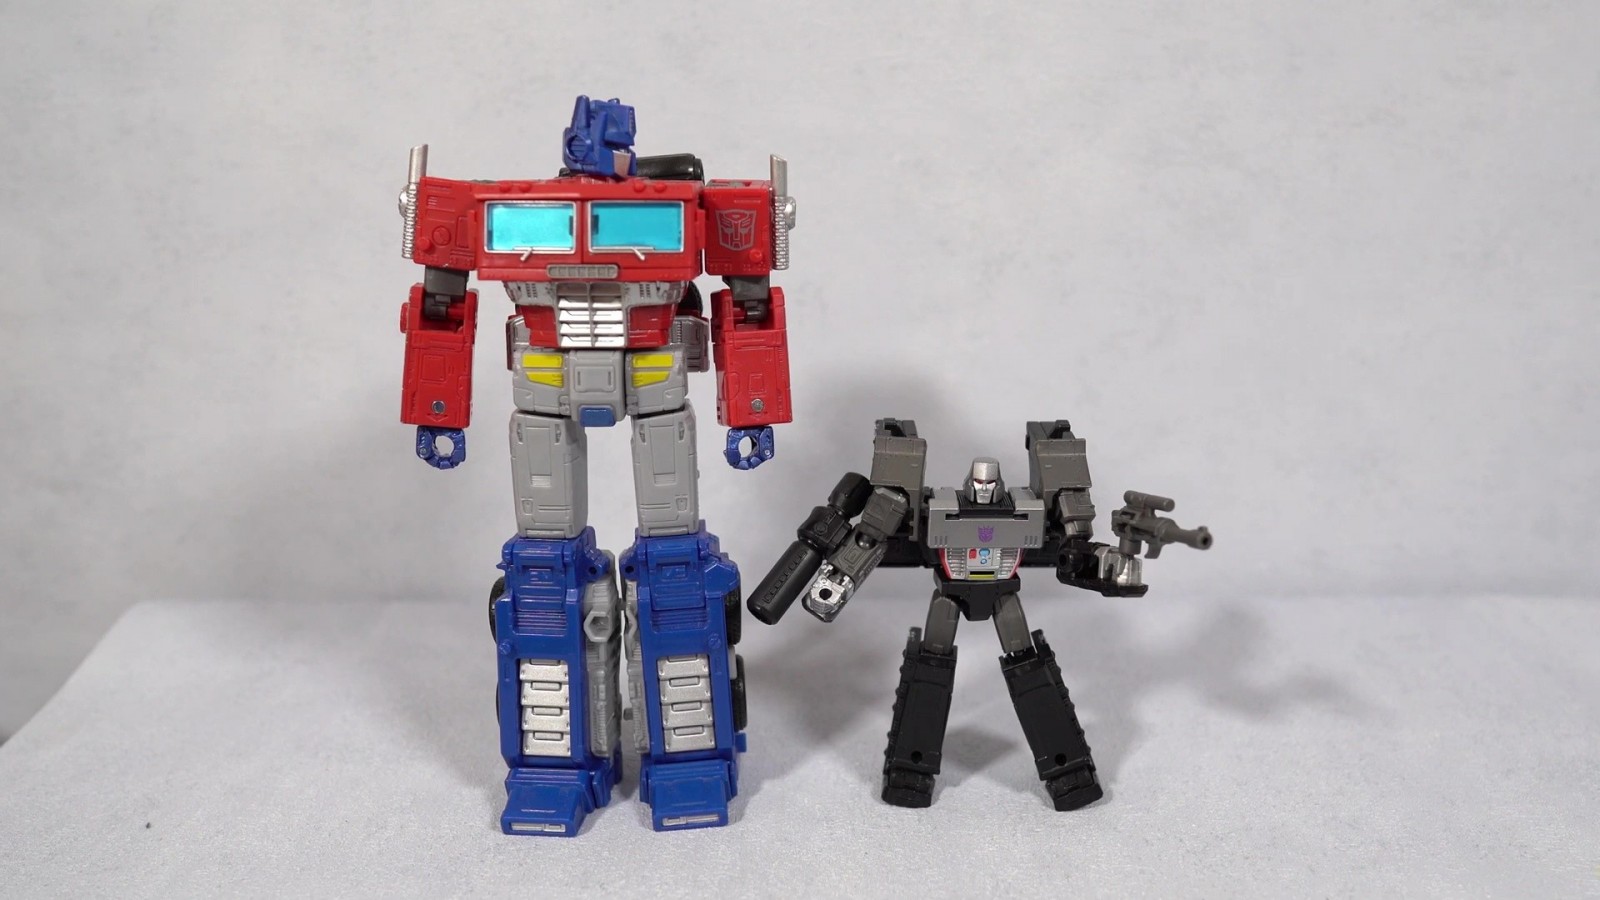 Video Review for Core Megatron and International Sighting for